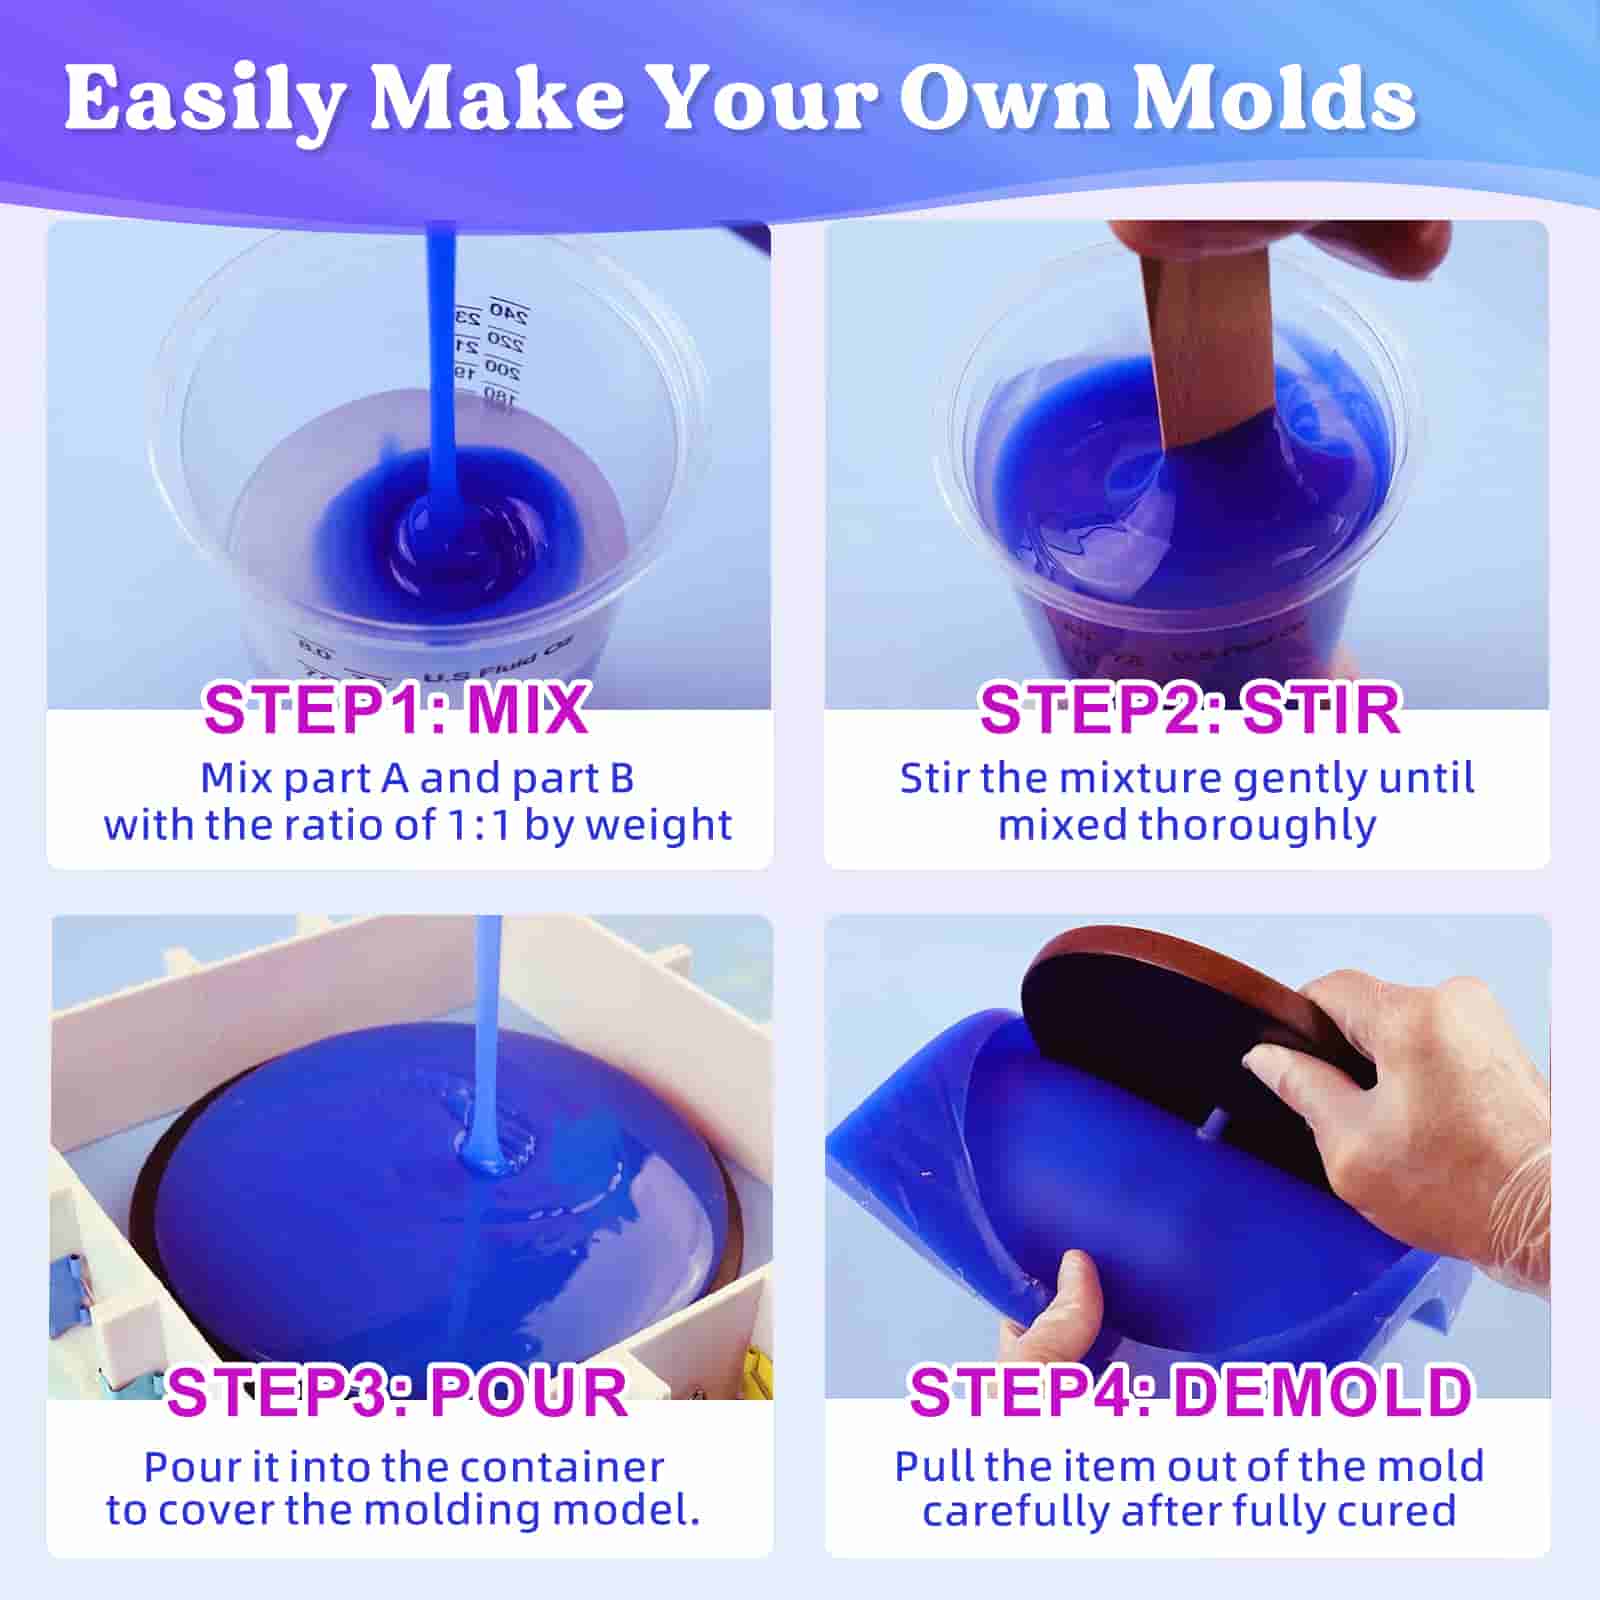 LET'S RESIN Silicone Mold Making Kit, 30A Liquid Silicone Rubber, 32 oz  Non-Toxic, Odorless - 1:1 Mixing Ratio Silicone for DIY Resin Mold,  Casting, Candle Making Molds, Soap Making Molds(Blue) – Let's Resin